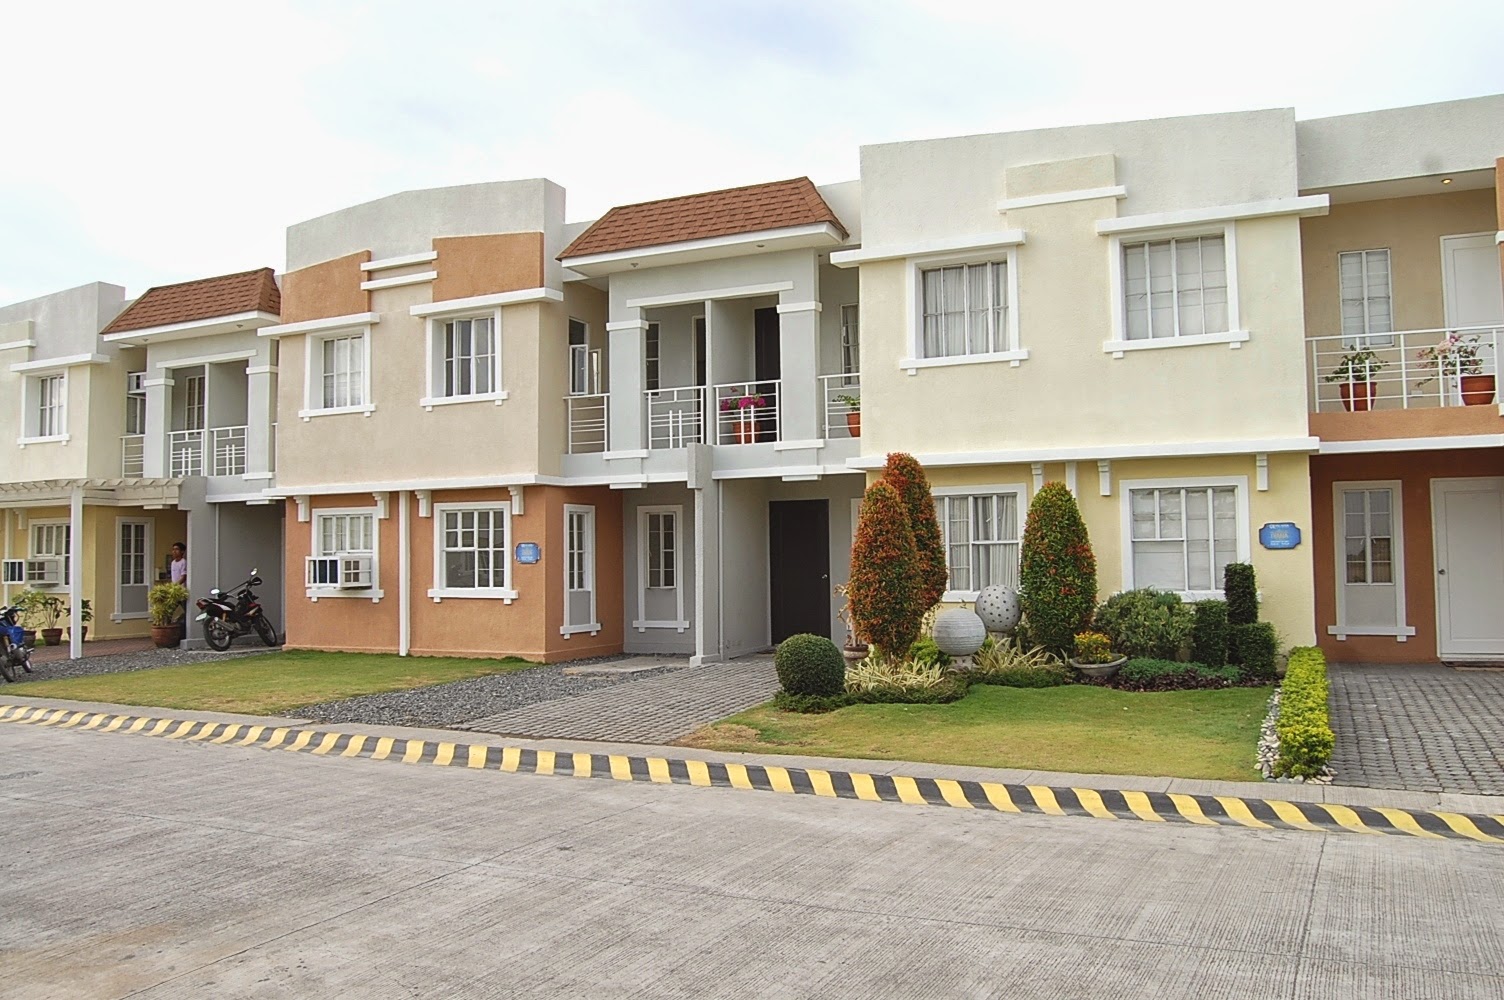 Ready for Occupancy House and Lot in Lancaster Cavite now called Lancaster New City in Cavite. Property for Sale in Cavite RFO in Lancaster Estates. Cheap RFO Diana Model Townhouses in Lancaster Imus Cavite. Home for Sale RFO in Lancaster Estates Cavite. Subdivision Houses RFO in Lancaster Homes Cavite. Affordable Real Estate for Sale near in Manila Ready for Occupancy. Cheap House and Lot in Cavite. Rent to Own RFO House in Lancaster. RFO House Ready for Occupancy near in Metro Manila via CAVITEX.